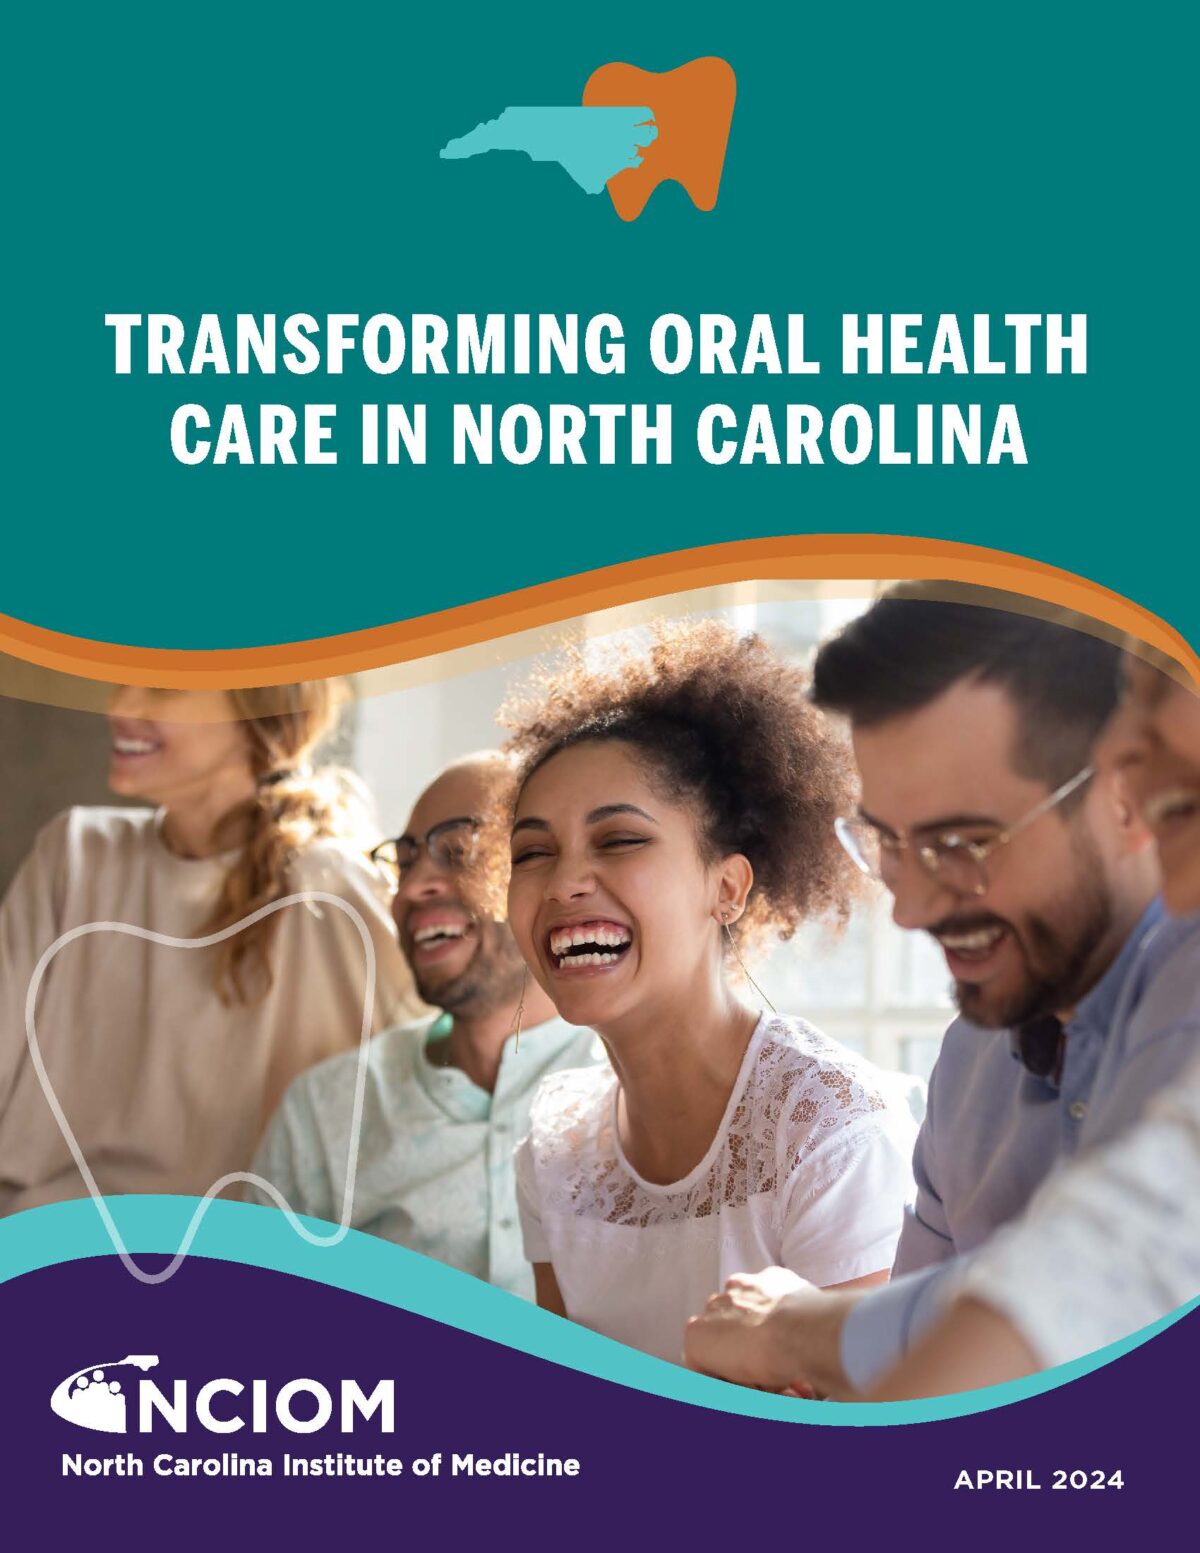 A silhouette of the state of NC and one of a tooth are connected at the top of the image, above the title Transforming Oral Health Care in North Carolina. The main focus of the image is a woman laughing, with her teeth showing.